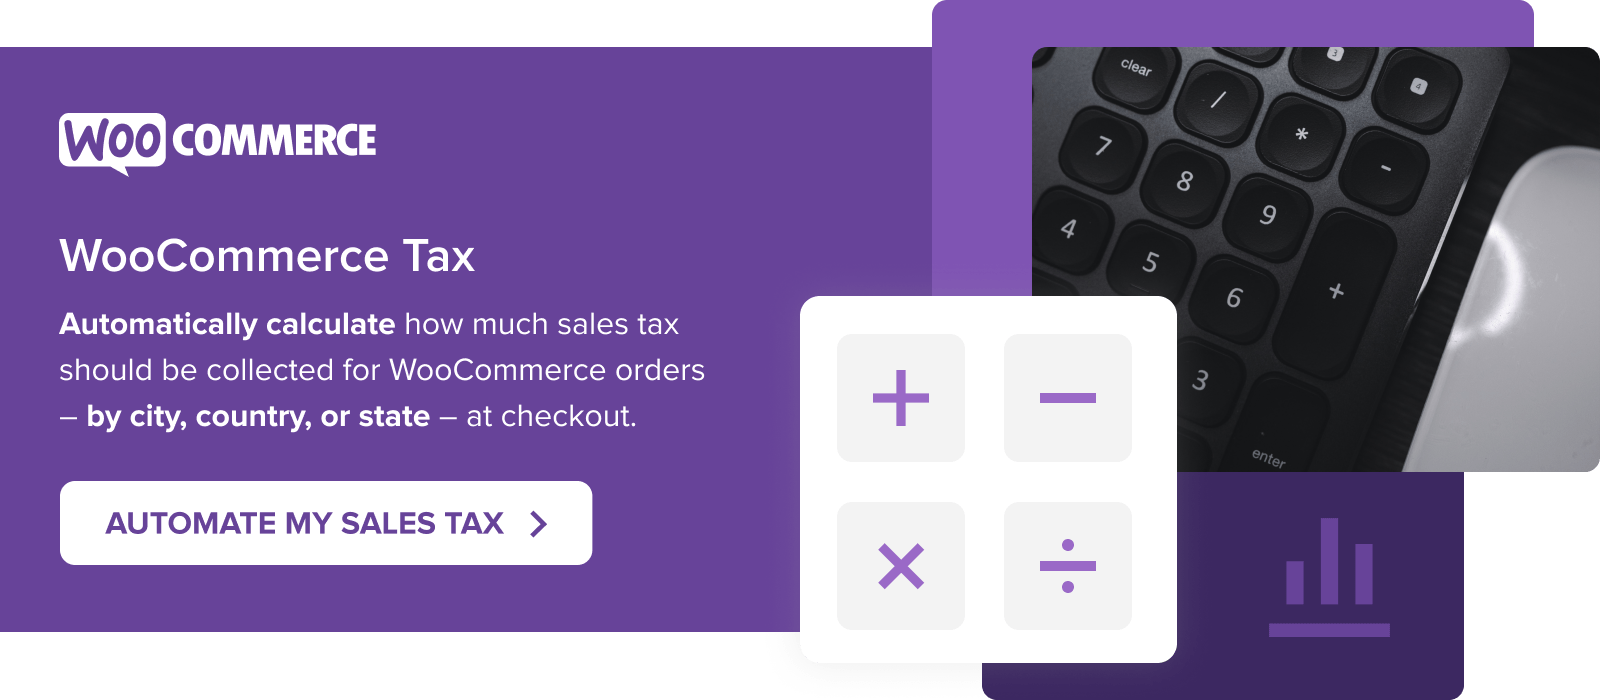 Automatically calculate your sales tax with WooCommerce Tax